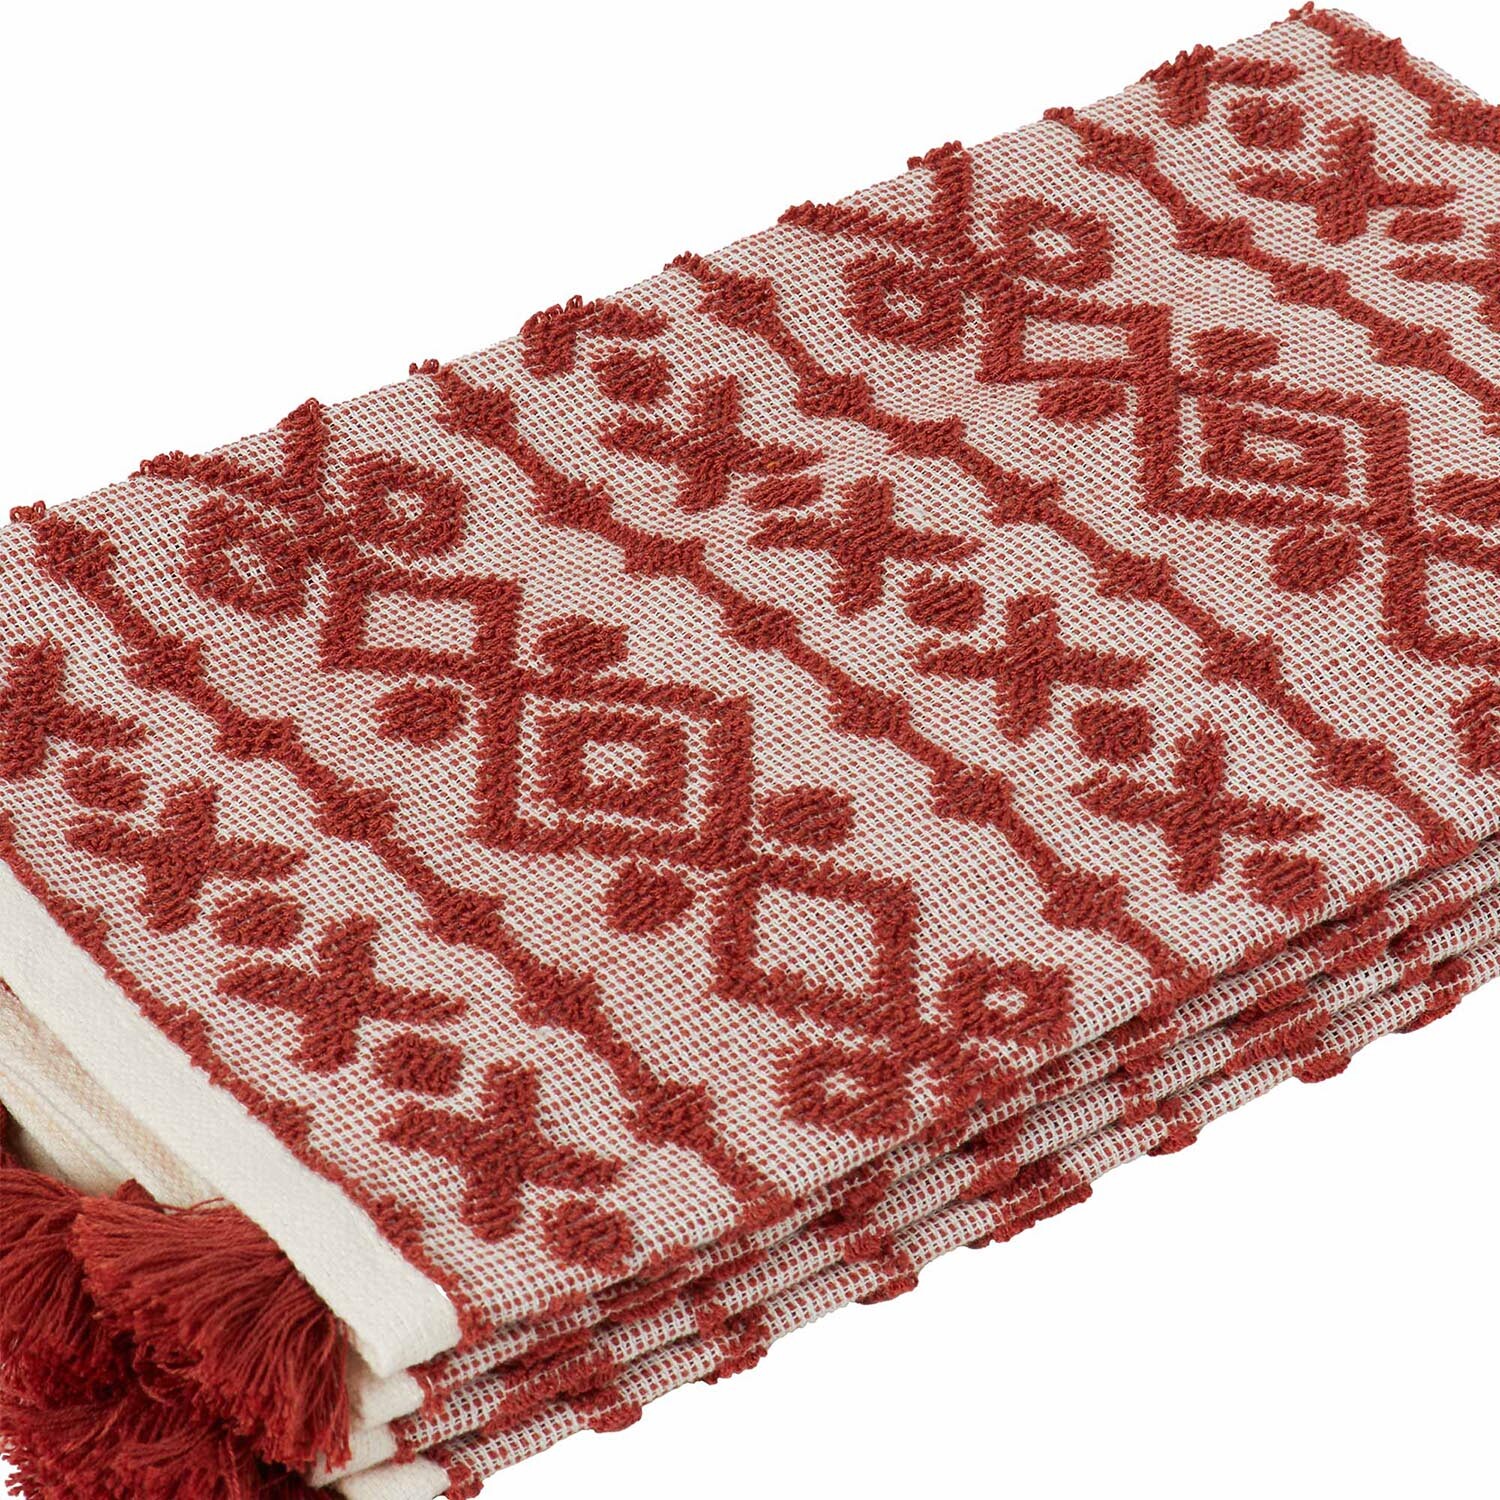 Pack of 2 Jacquard Terry Kitchen Towels with Tassels - Burnt Orange Image 3